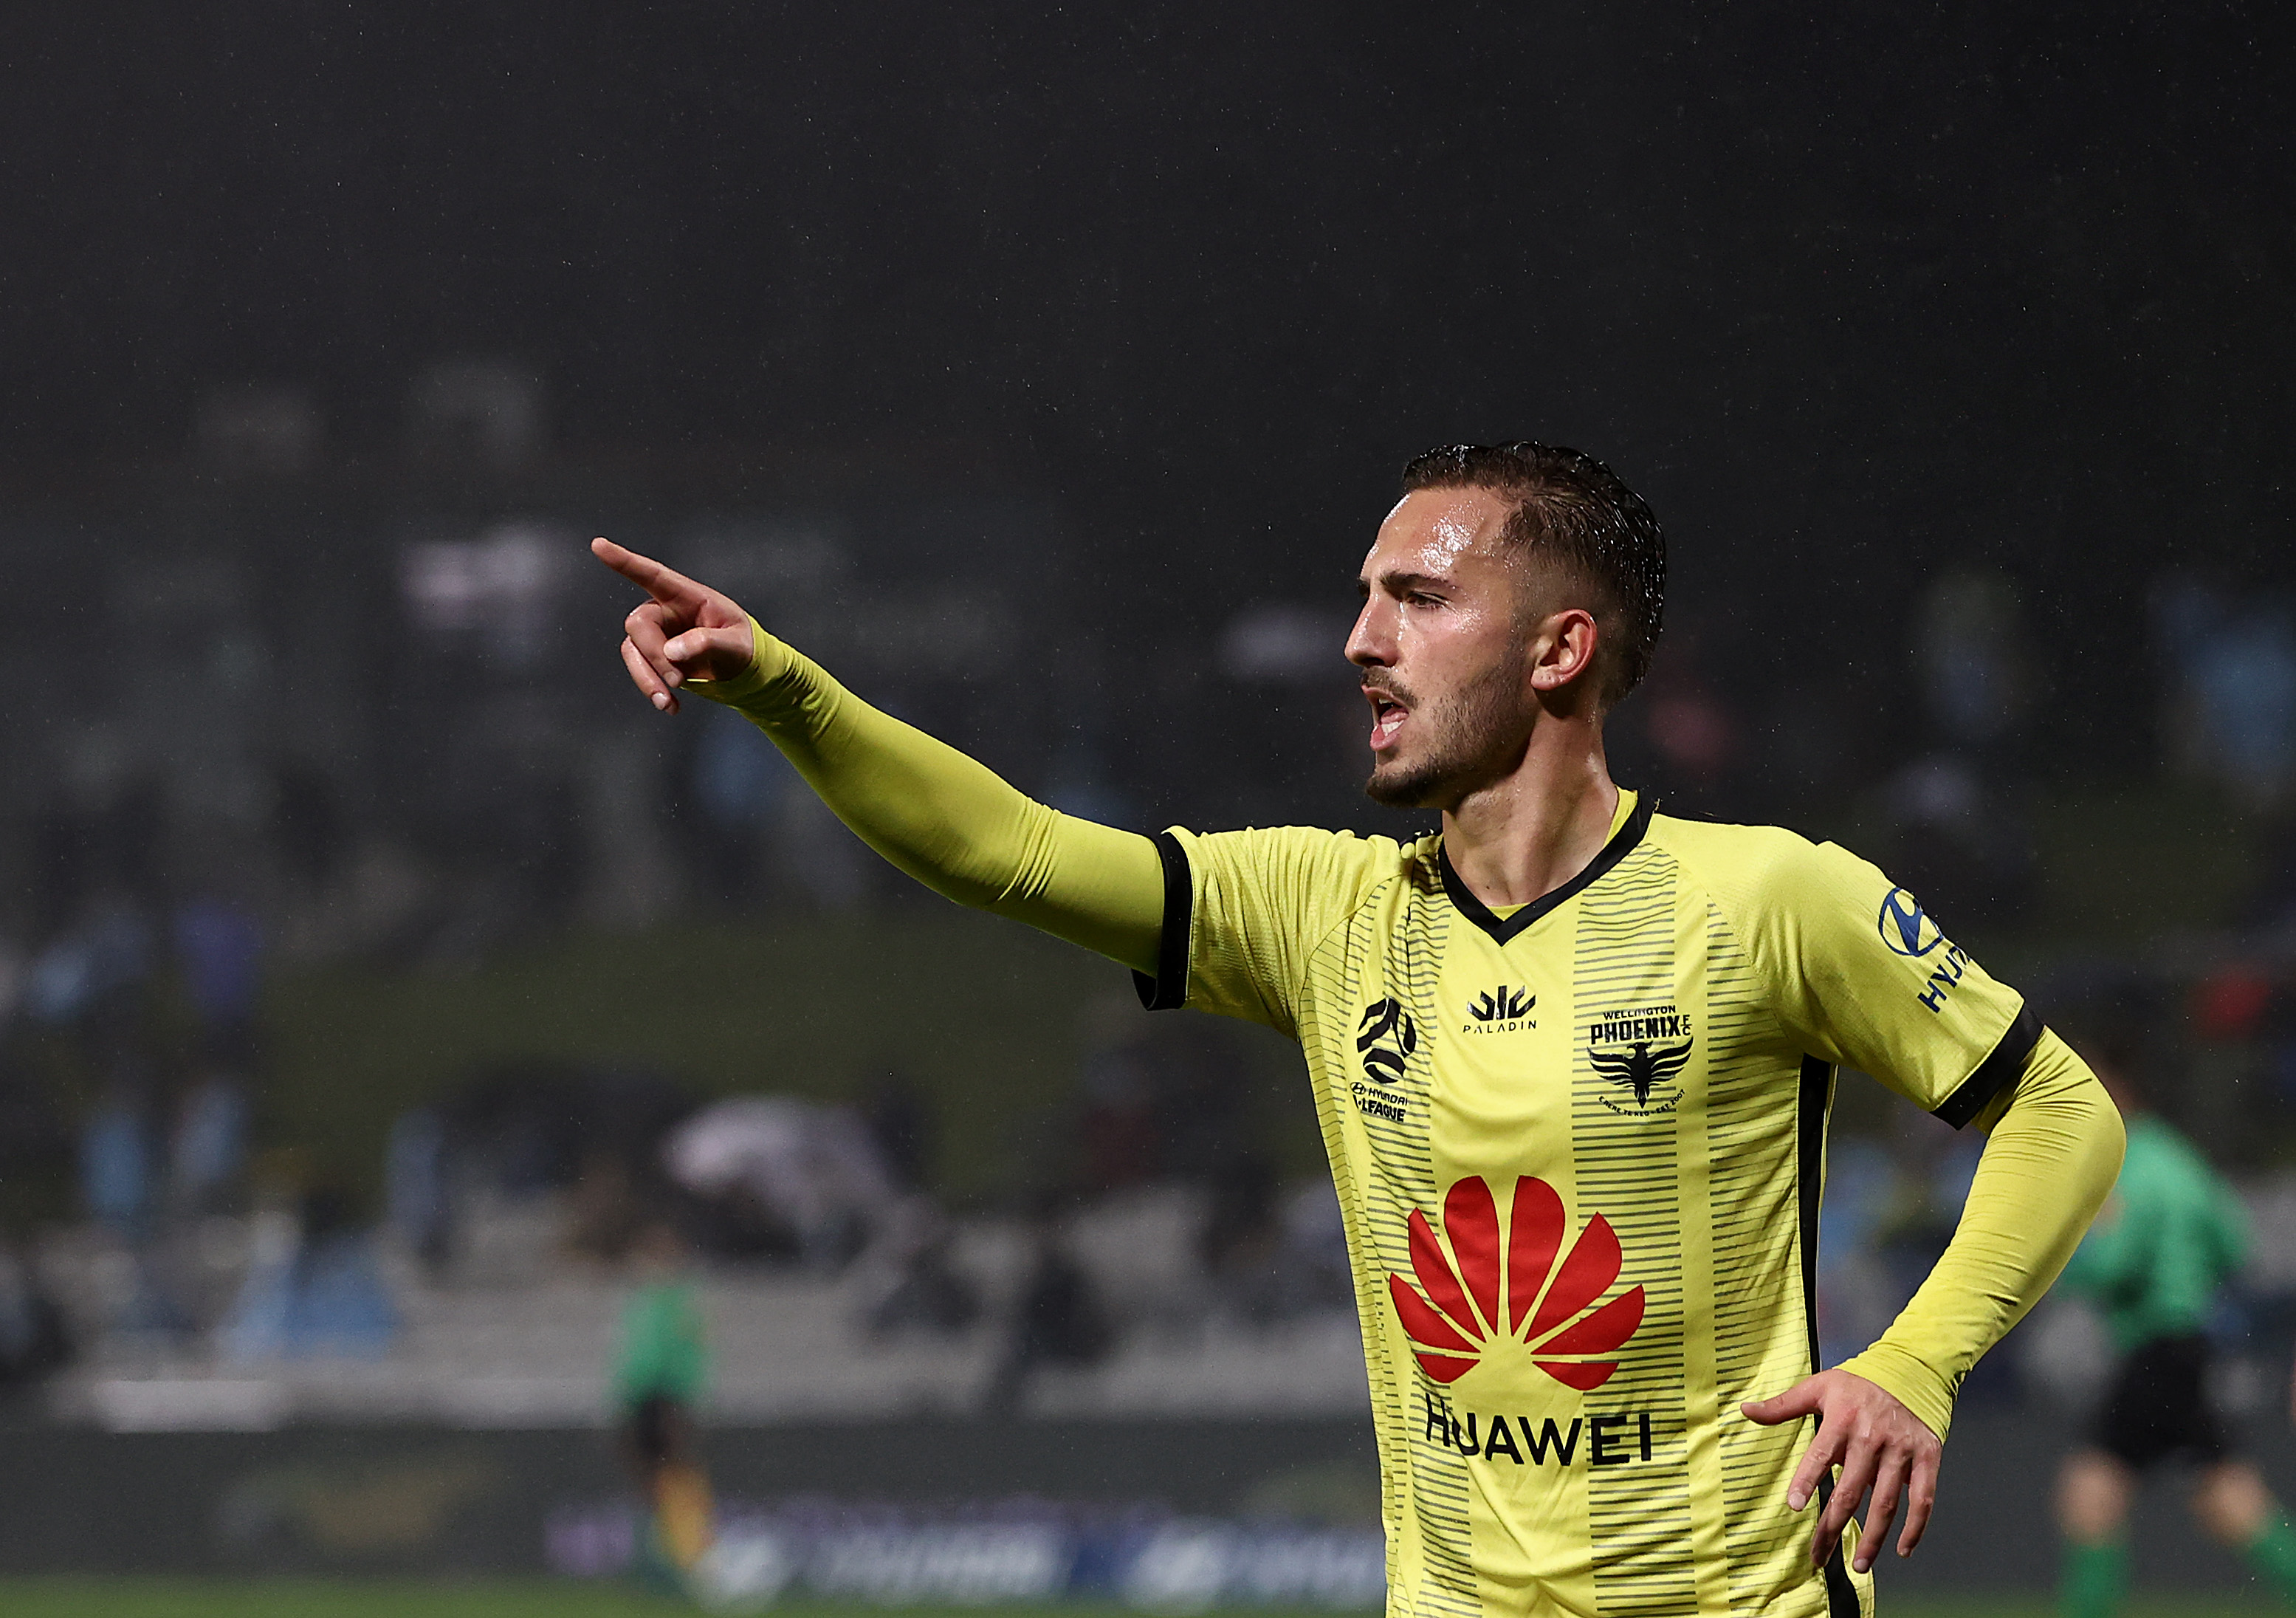 Piscopo is coming off a breakout season with Wellington in the A-League